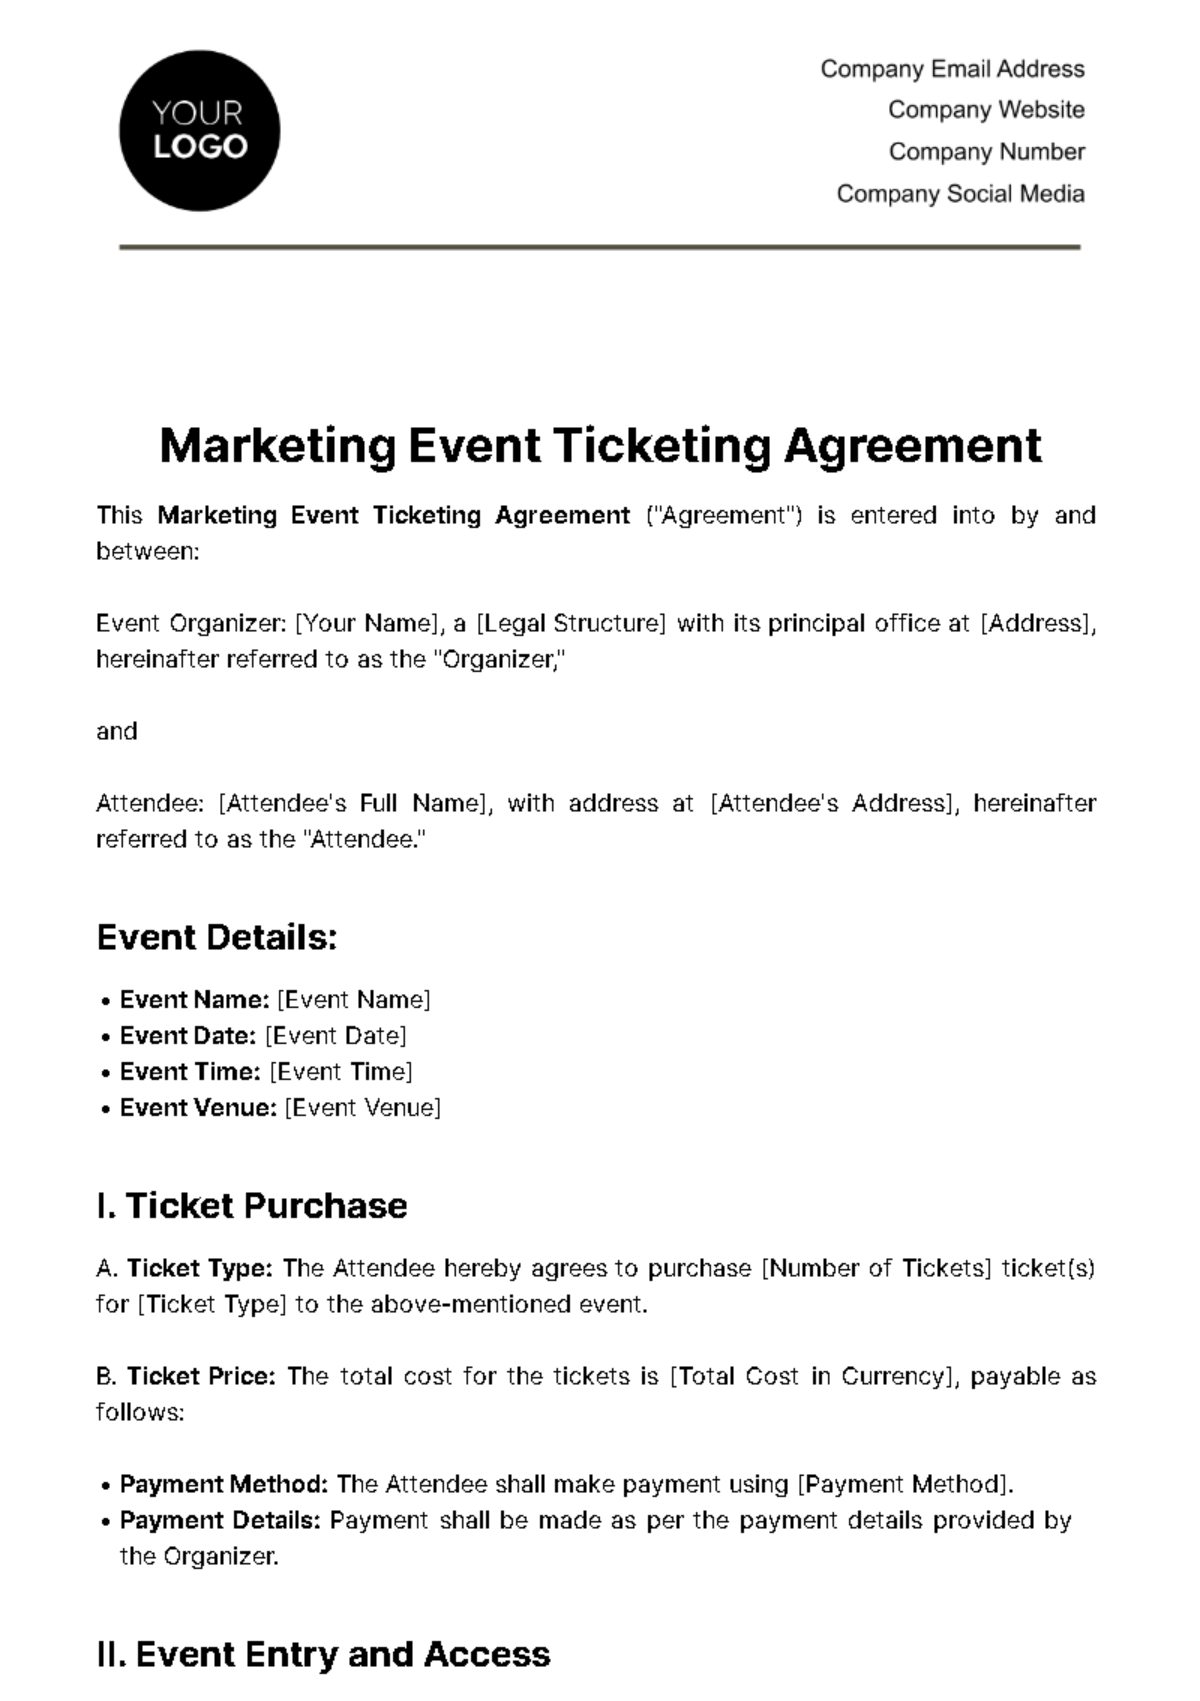 Marketing Event Ticketing Agreement Template